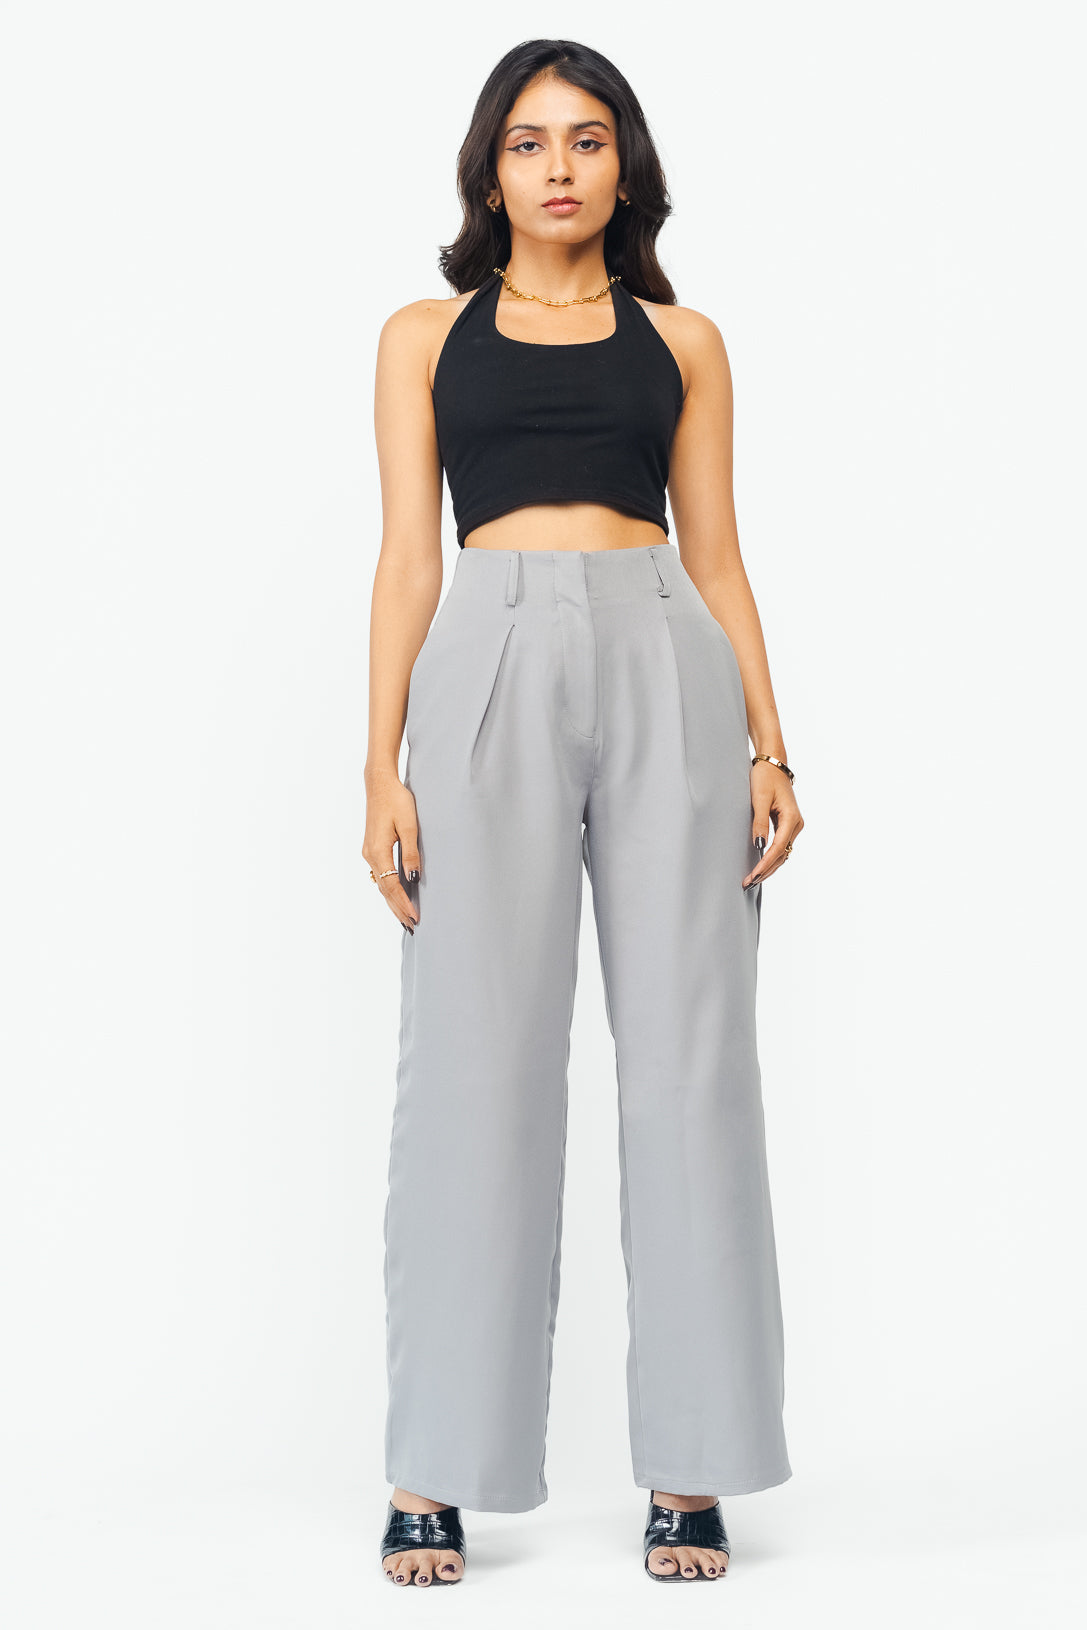 COVERT GREY TROUSERS